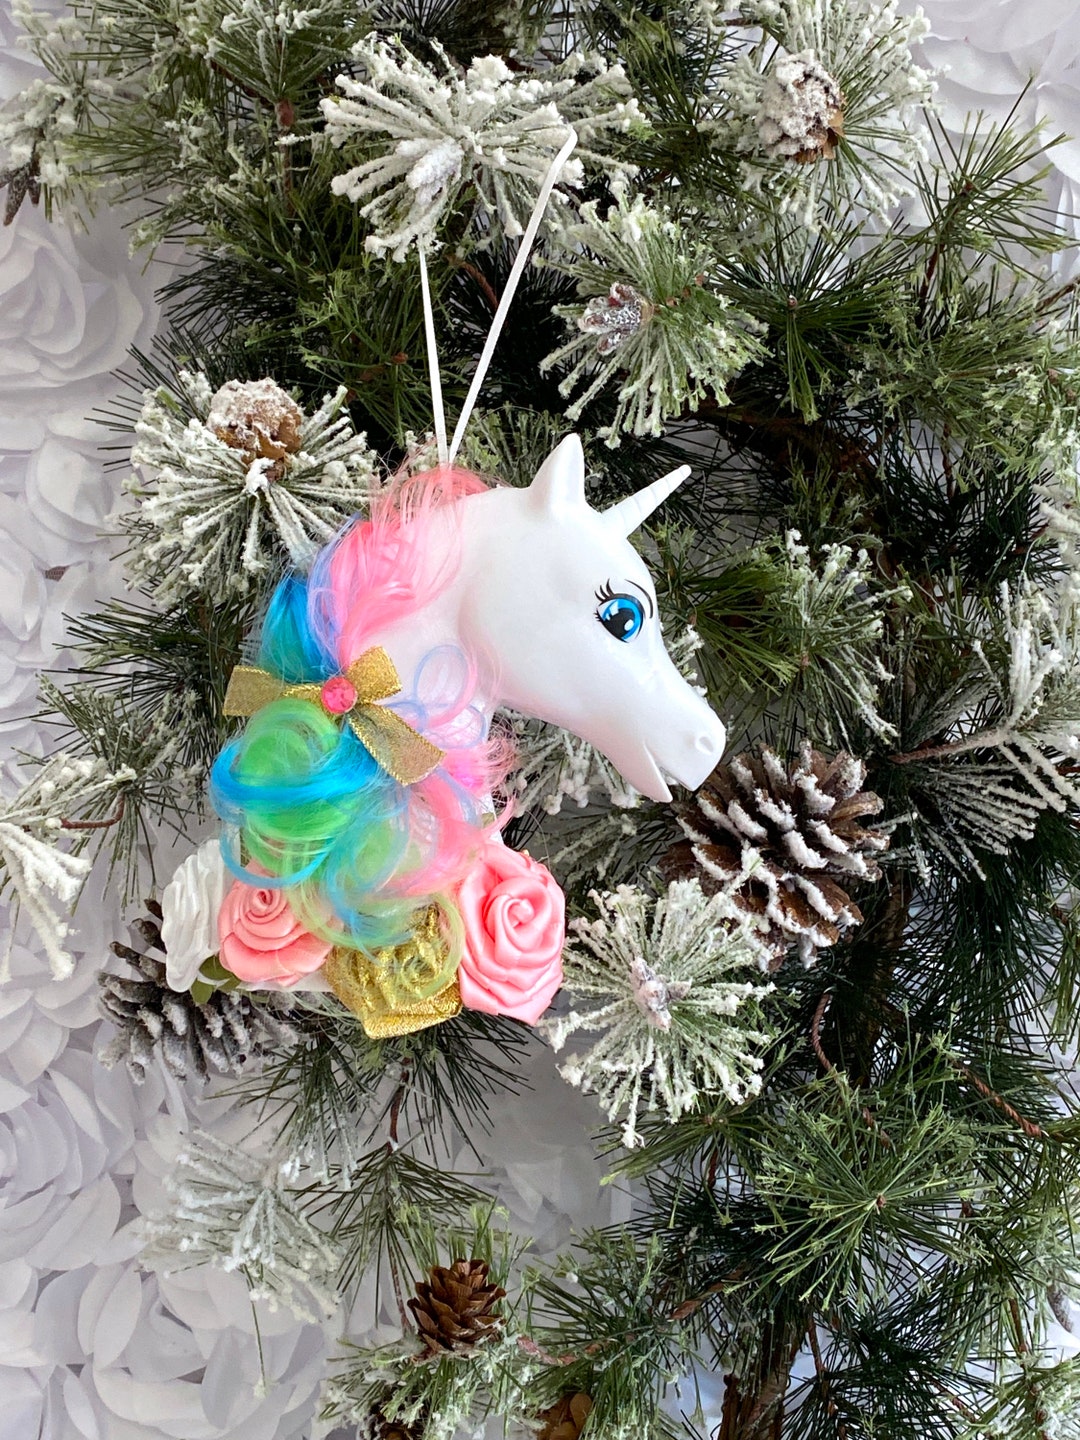 Unicorn Christmas Tree with Iridescent Decorations from Oriental Trading